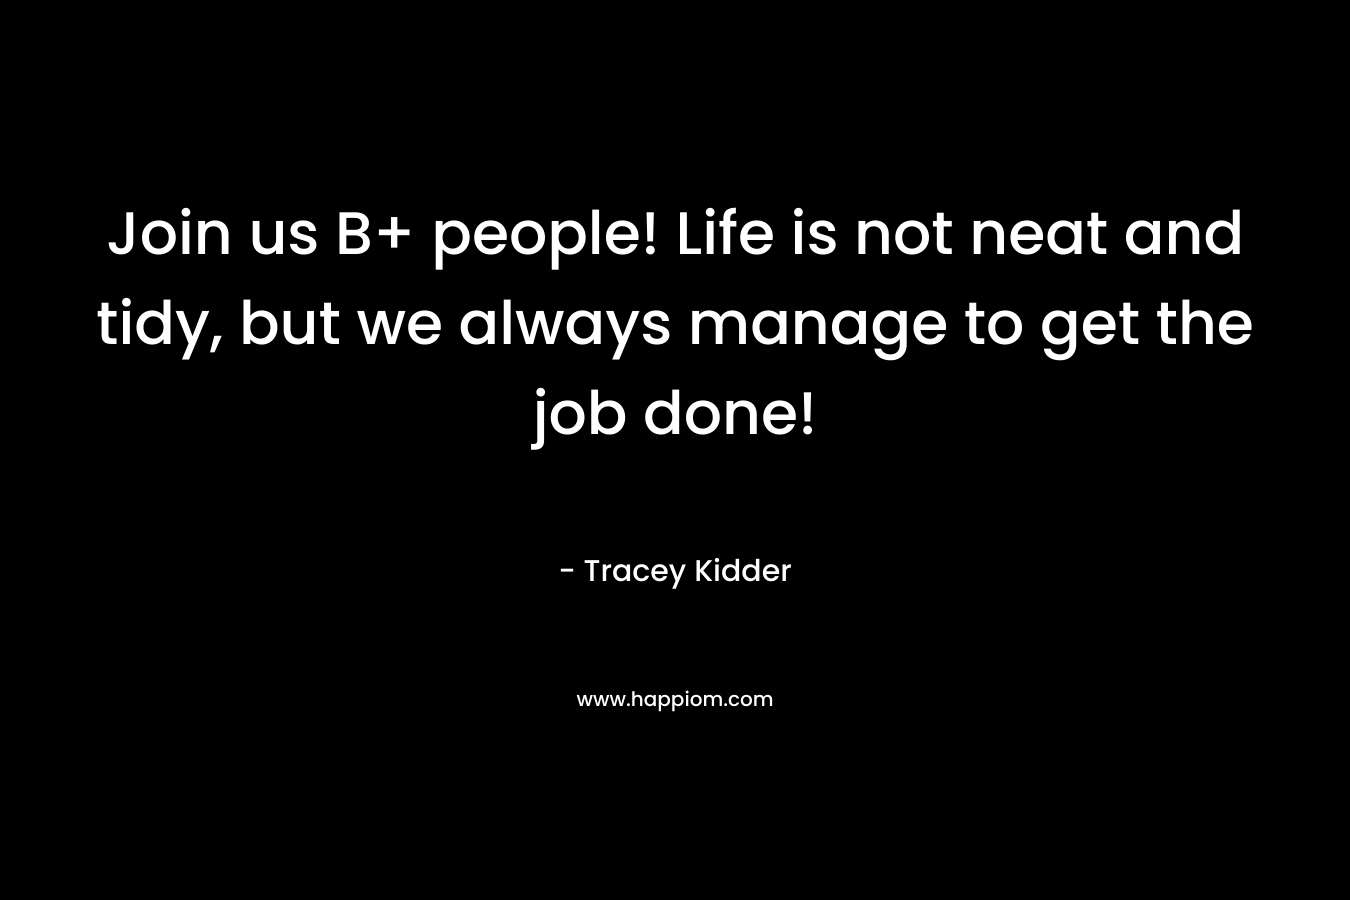 Join us B+ people! Life is not neat and tidy, but we always manage to get the job done! – Tracey Kidder